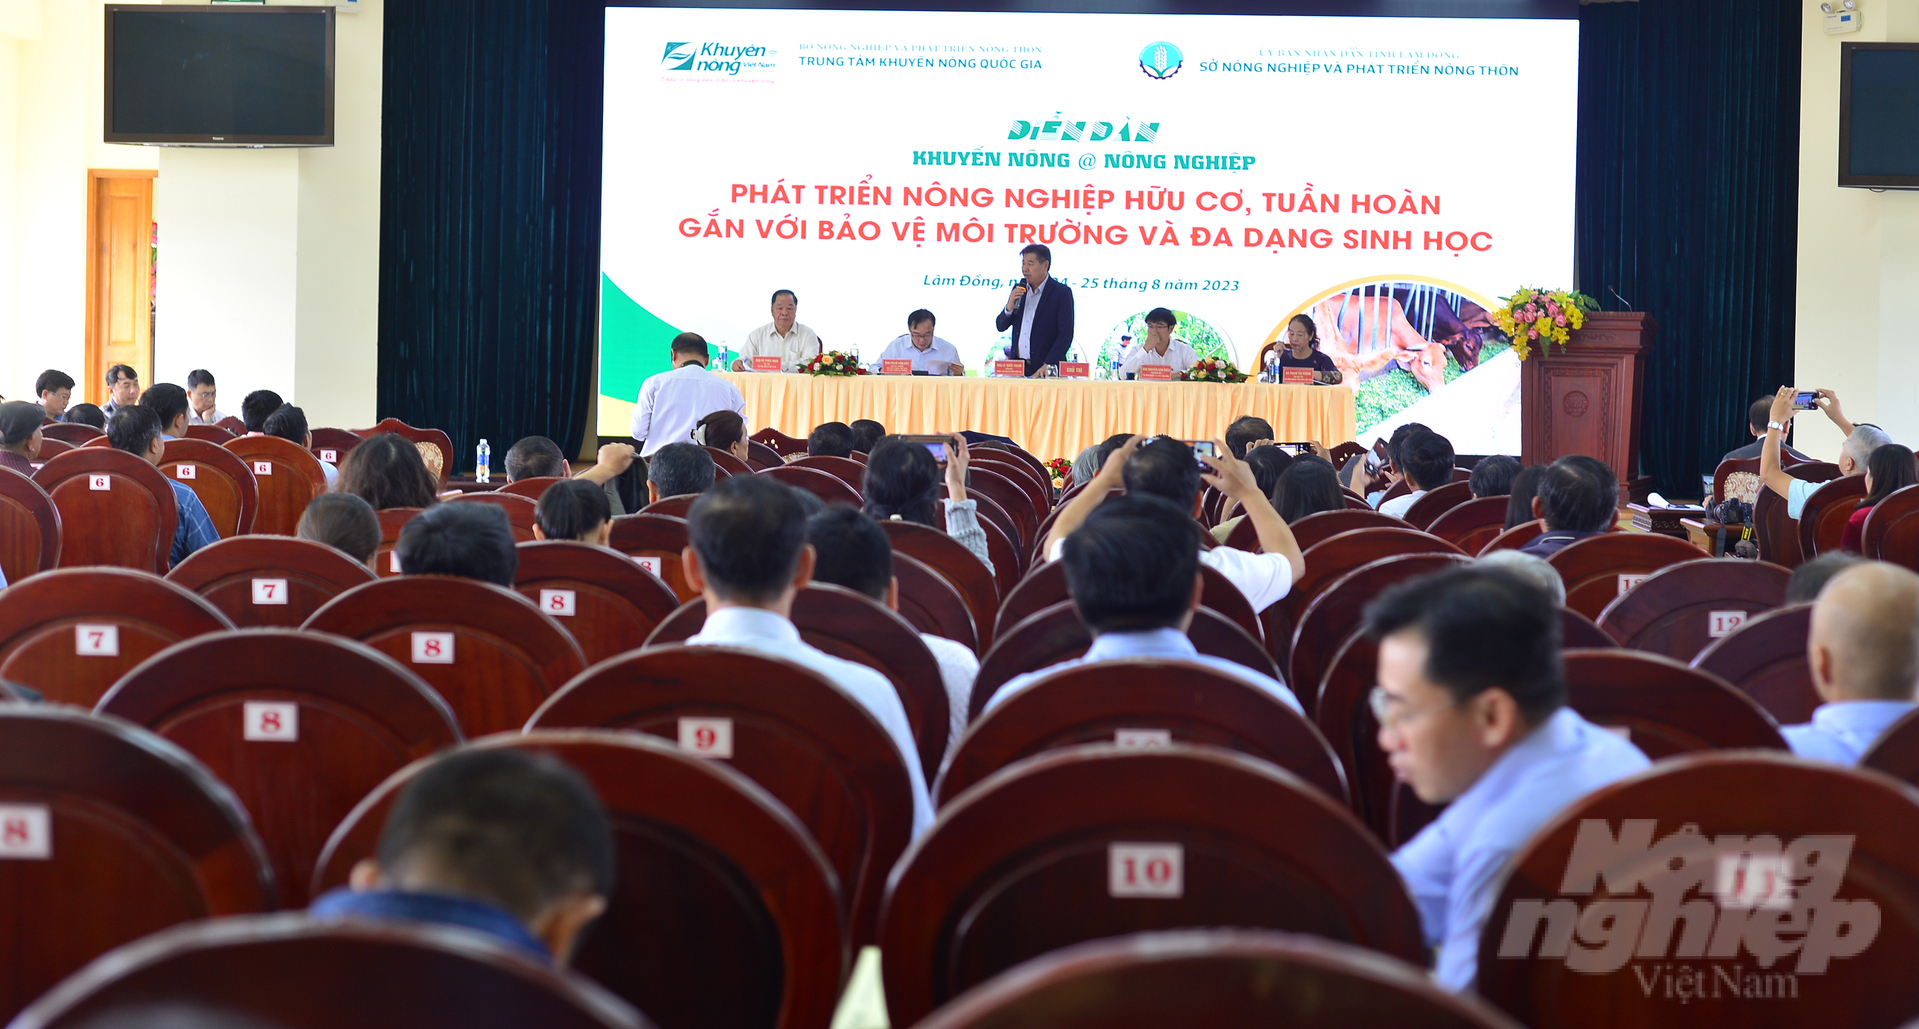 Many departments, businesses, and cooperatives in the Central Highlands and South Central regions attended the forum. Photo: Minh Hau.